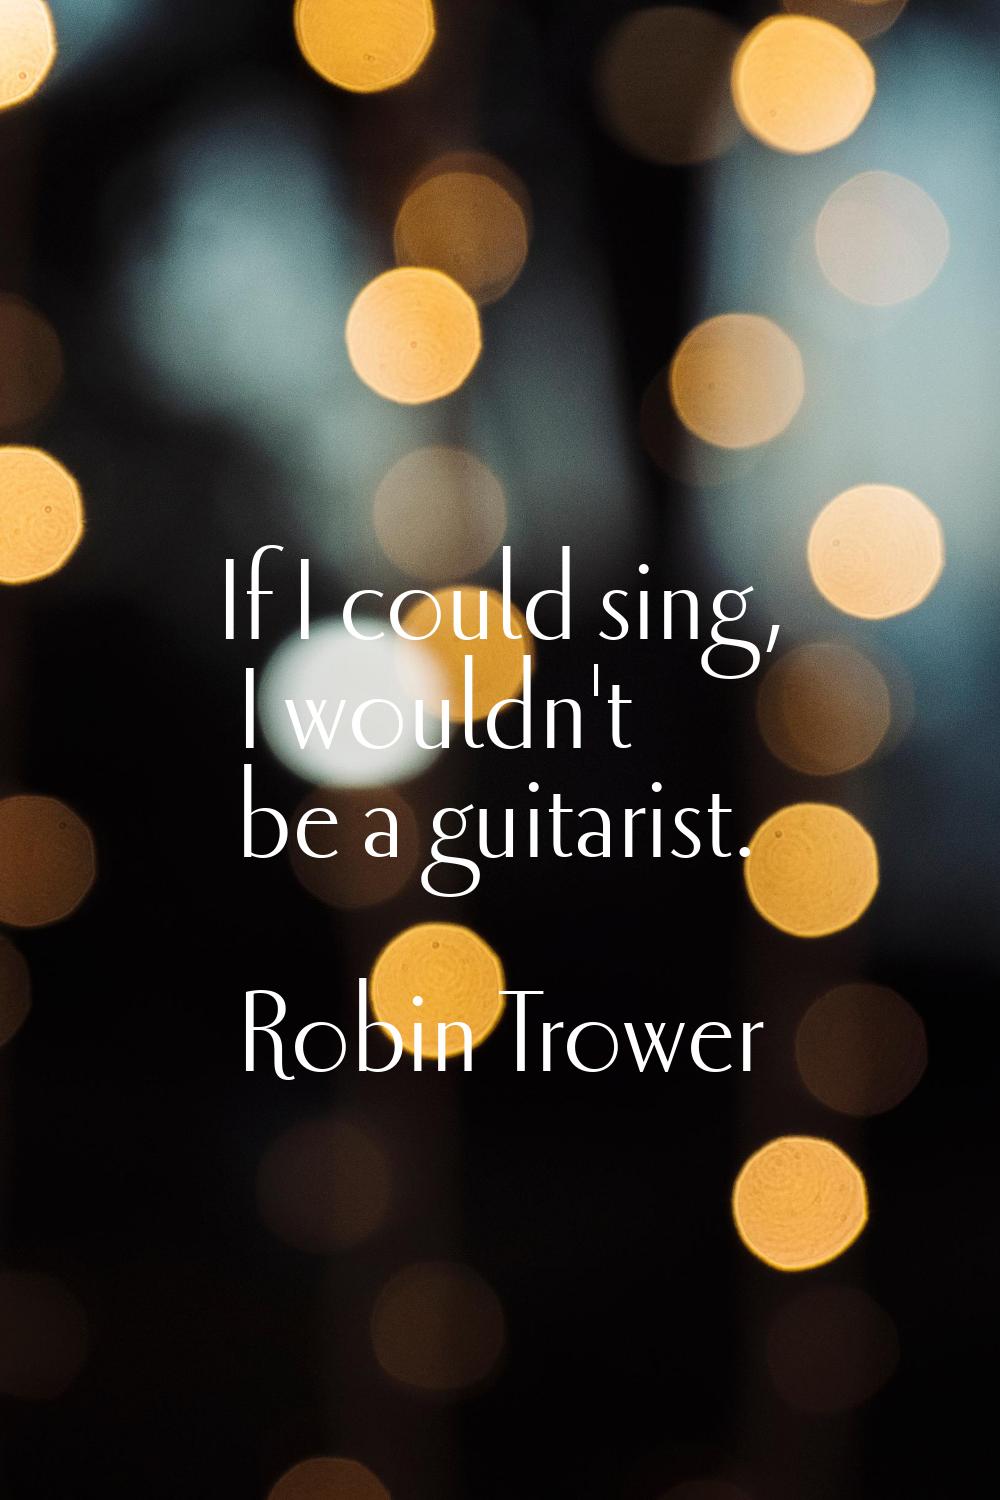 If I could sing, I wouldn't be a guitarist.